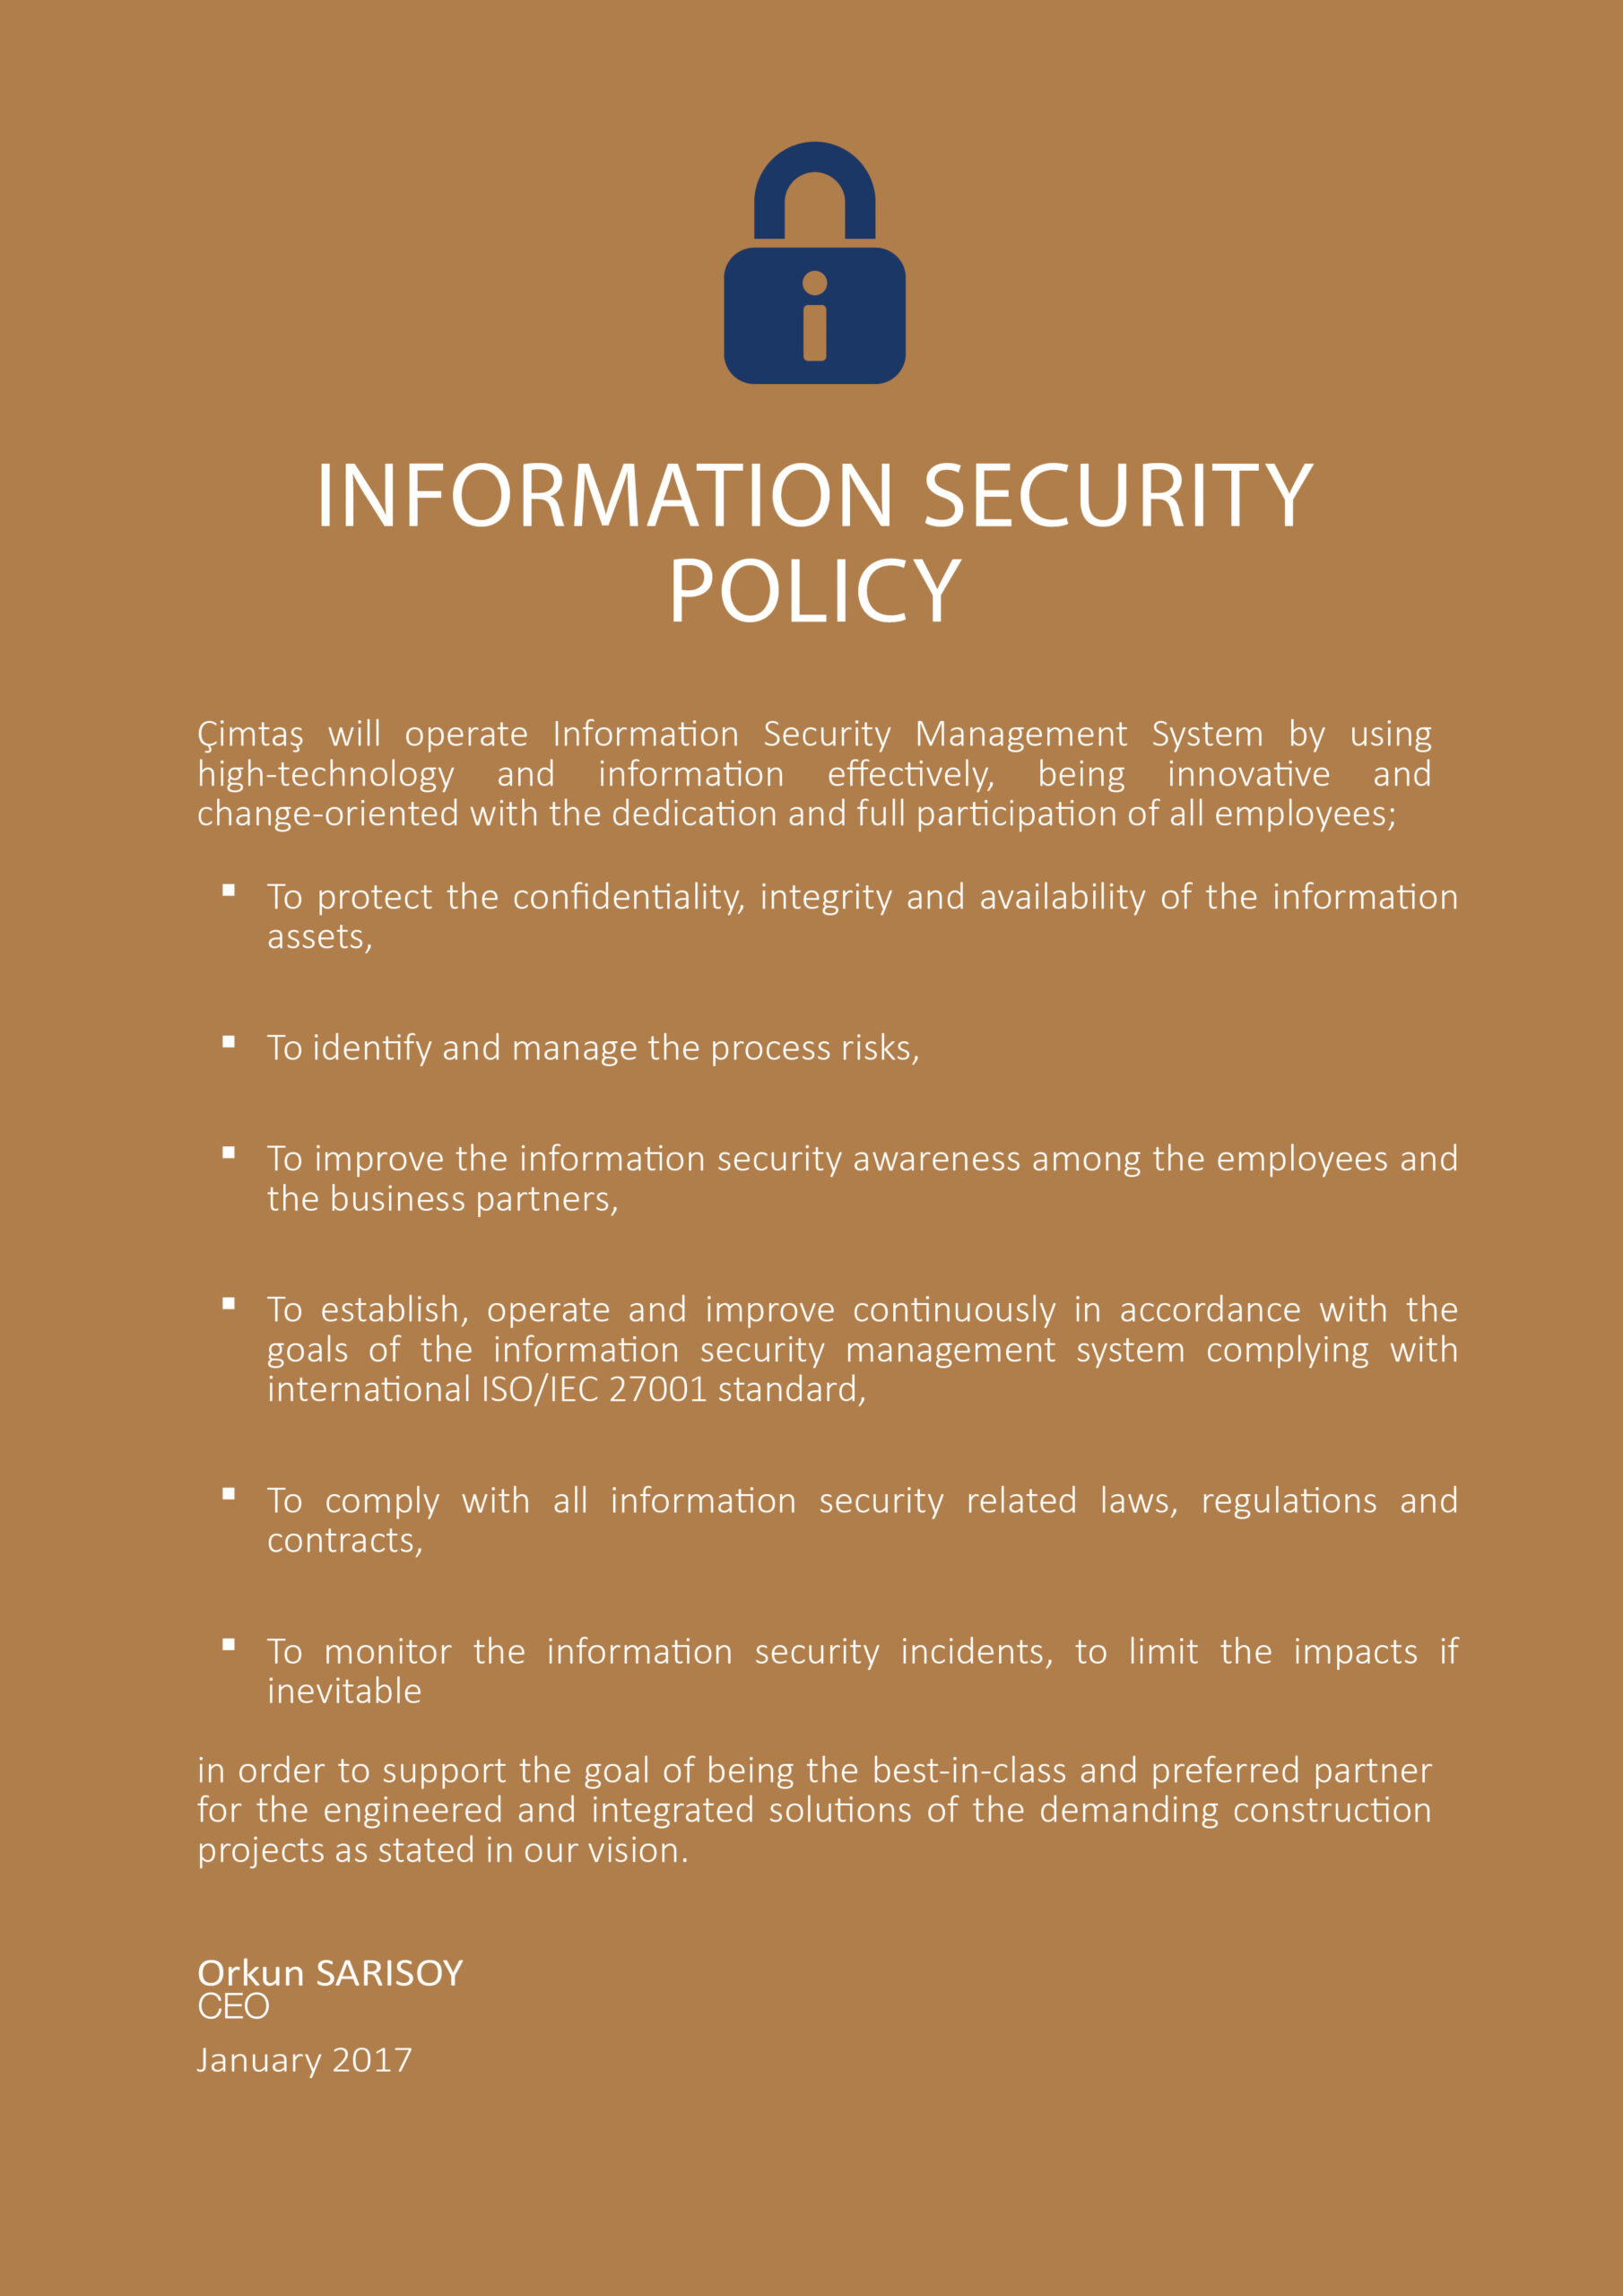 Information security policy